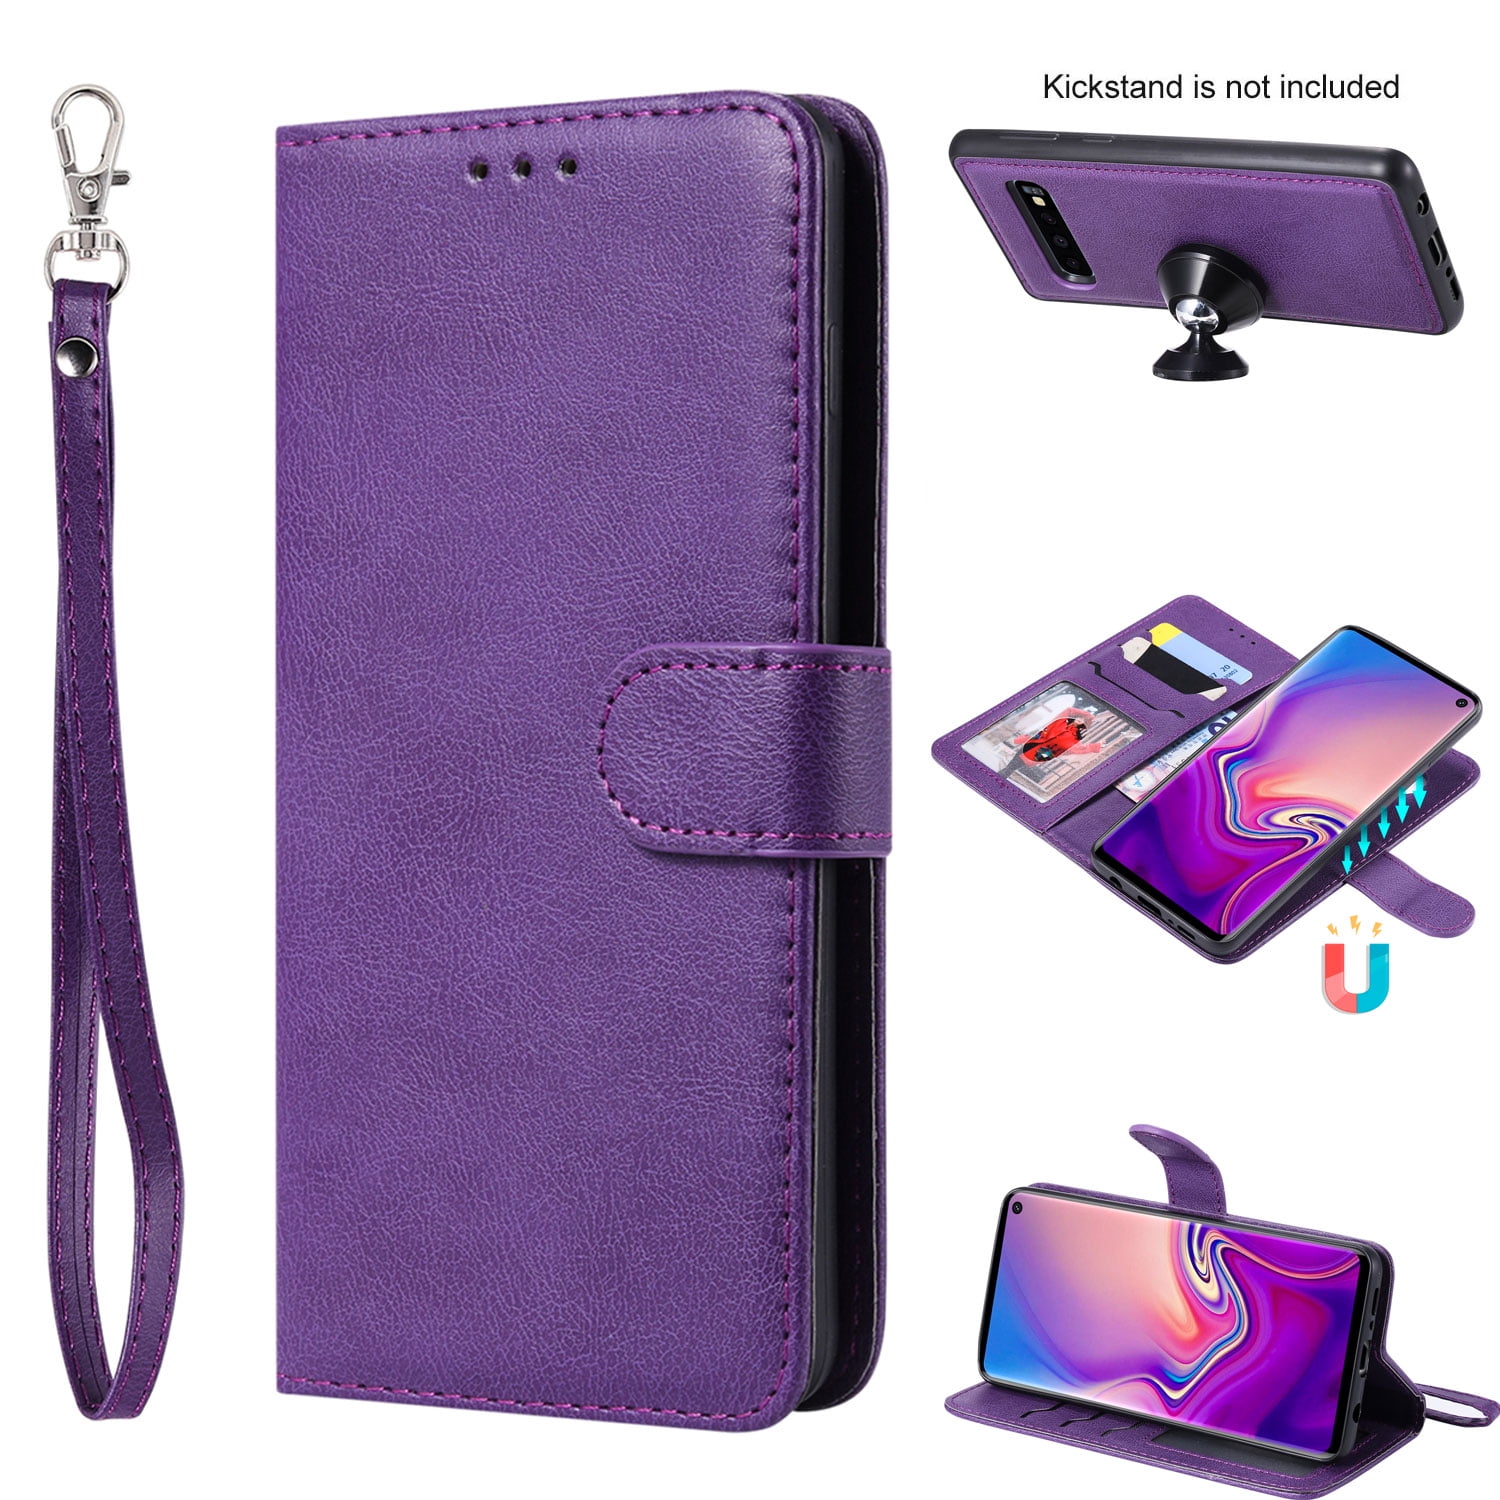 Flip Case Fit for Samsung Galaxy S10 Kickstand Card Holders Luxury Purple Leather Cover Wallet for Samsung Galaxy S10 